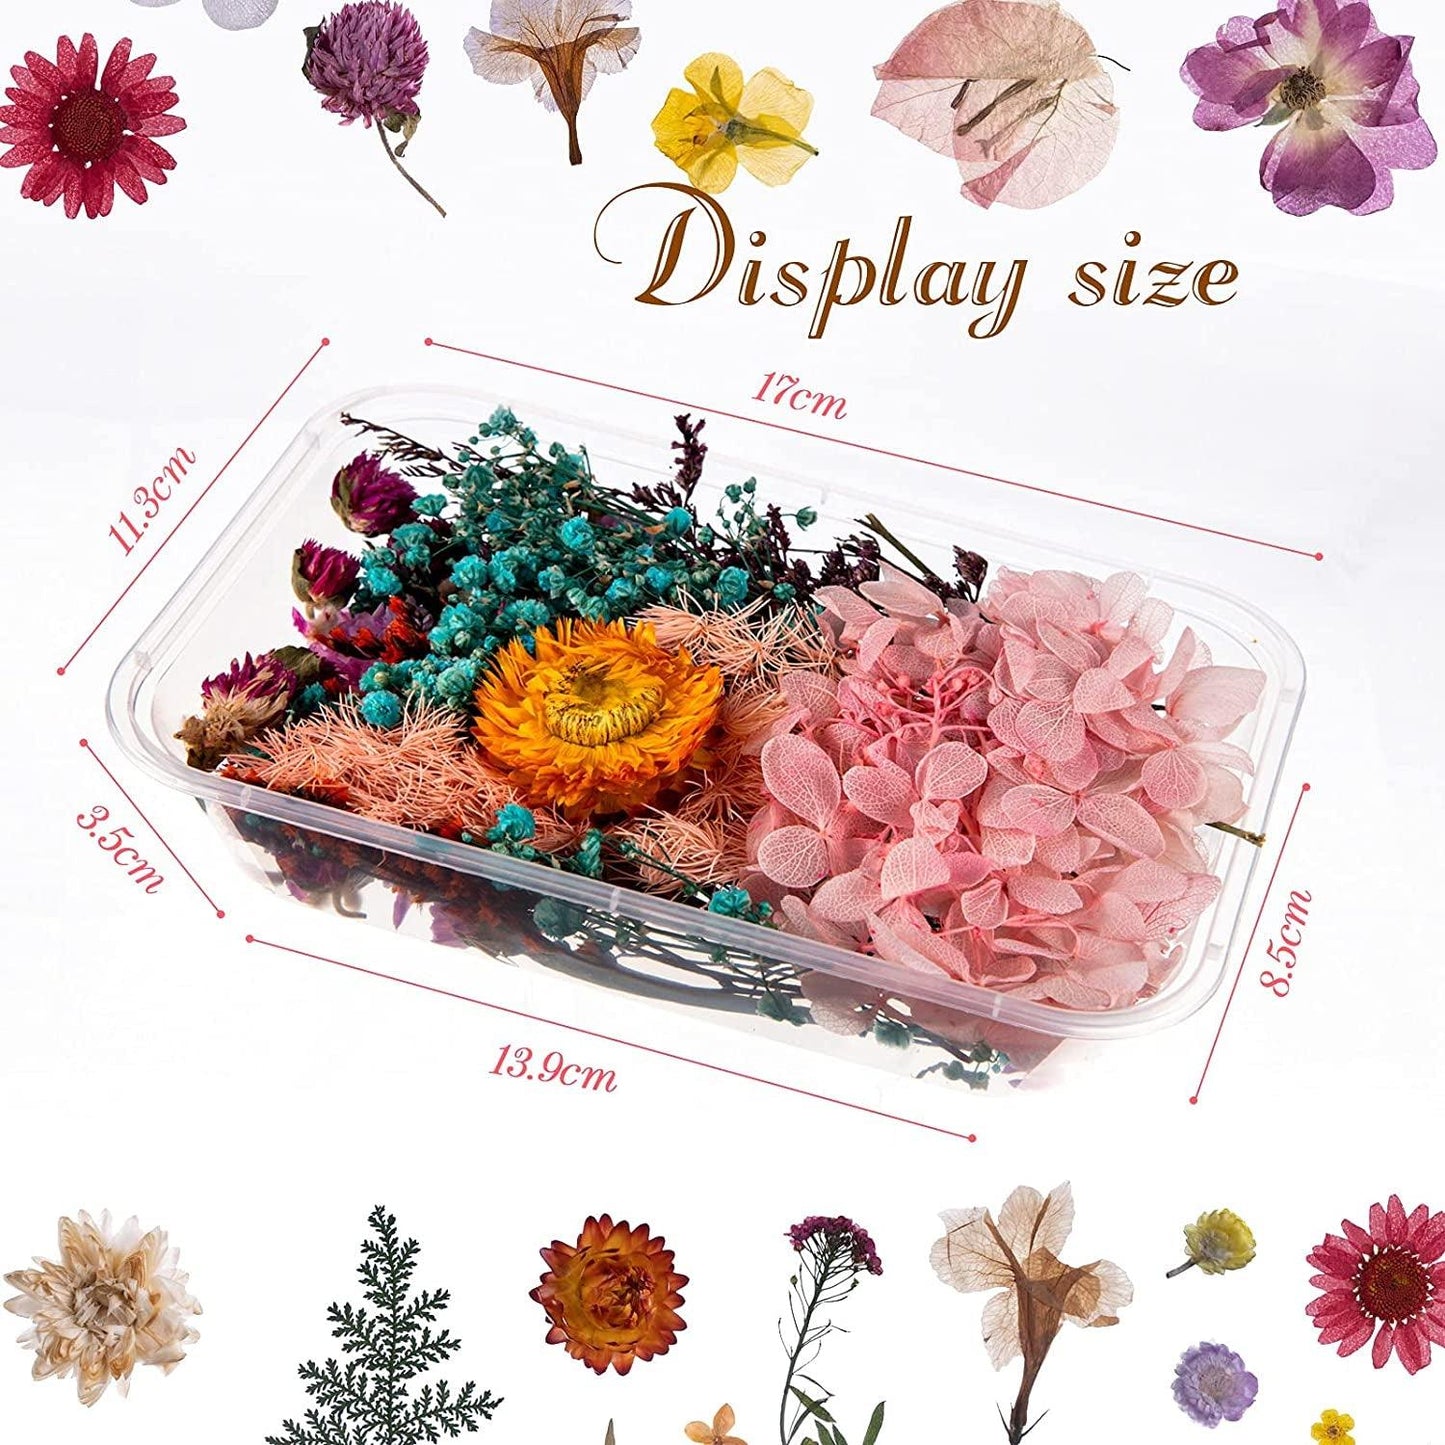 2 Random Boxes Pressed Flowers Dried Pressed Flowers for Resin Real Dried Flower Leaves Mixed Pressed Flower Colorful Real Dried Flower with Tweezers for Resin Jewelry DIY Making Wedding - WoodArtSupply